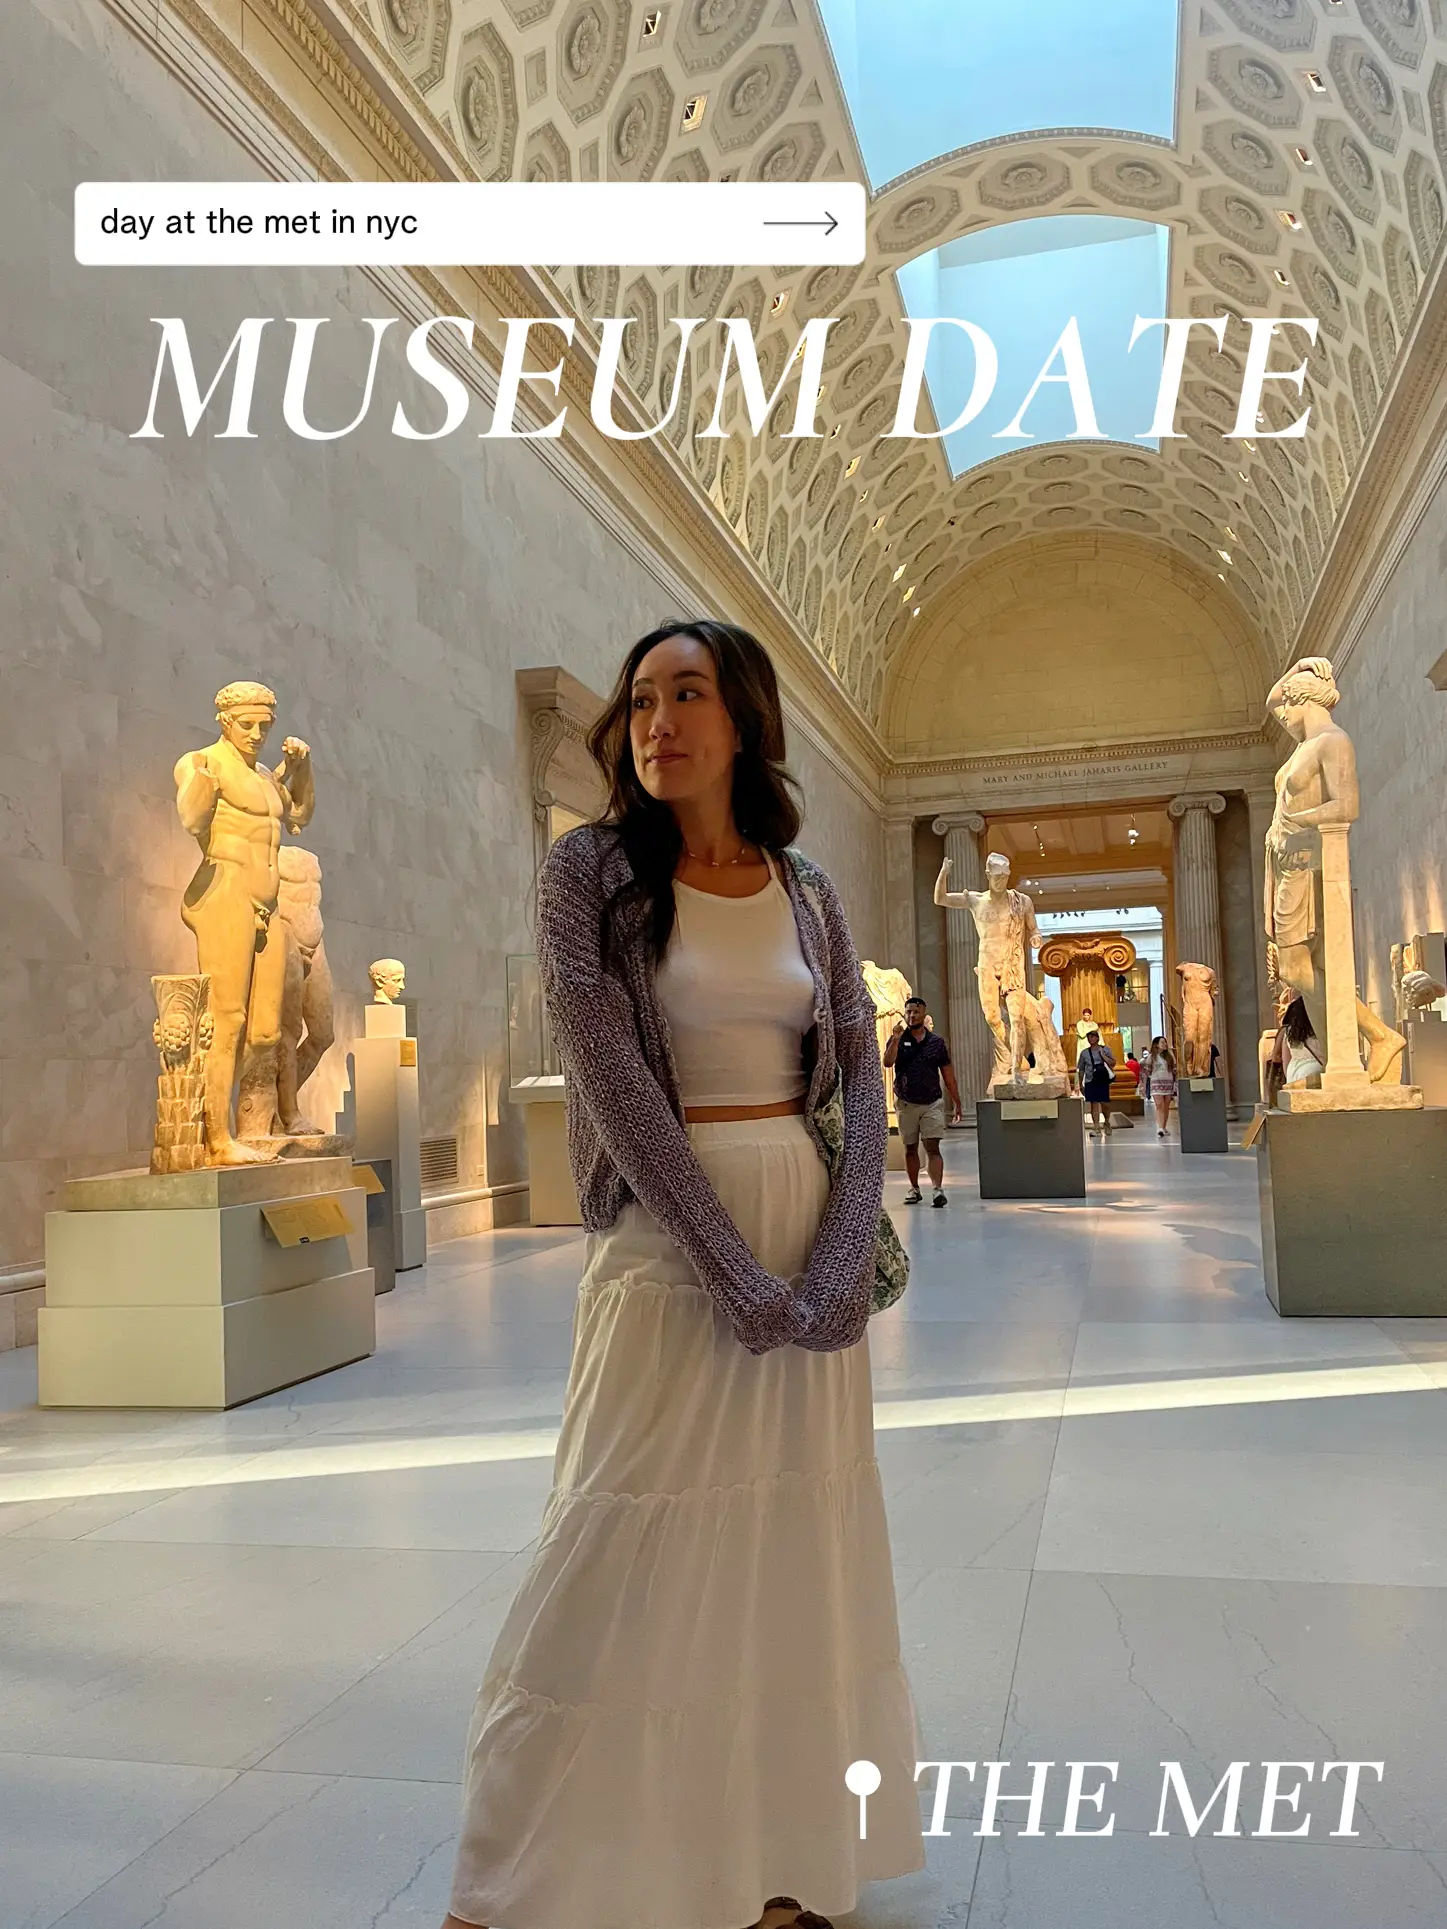 MUSEUM DATE's images